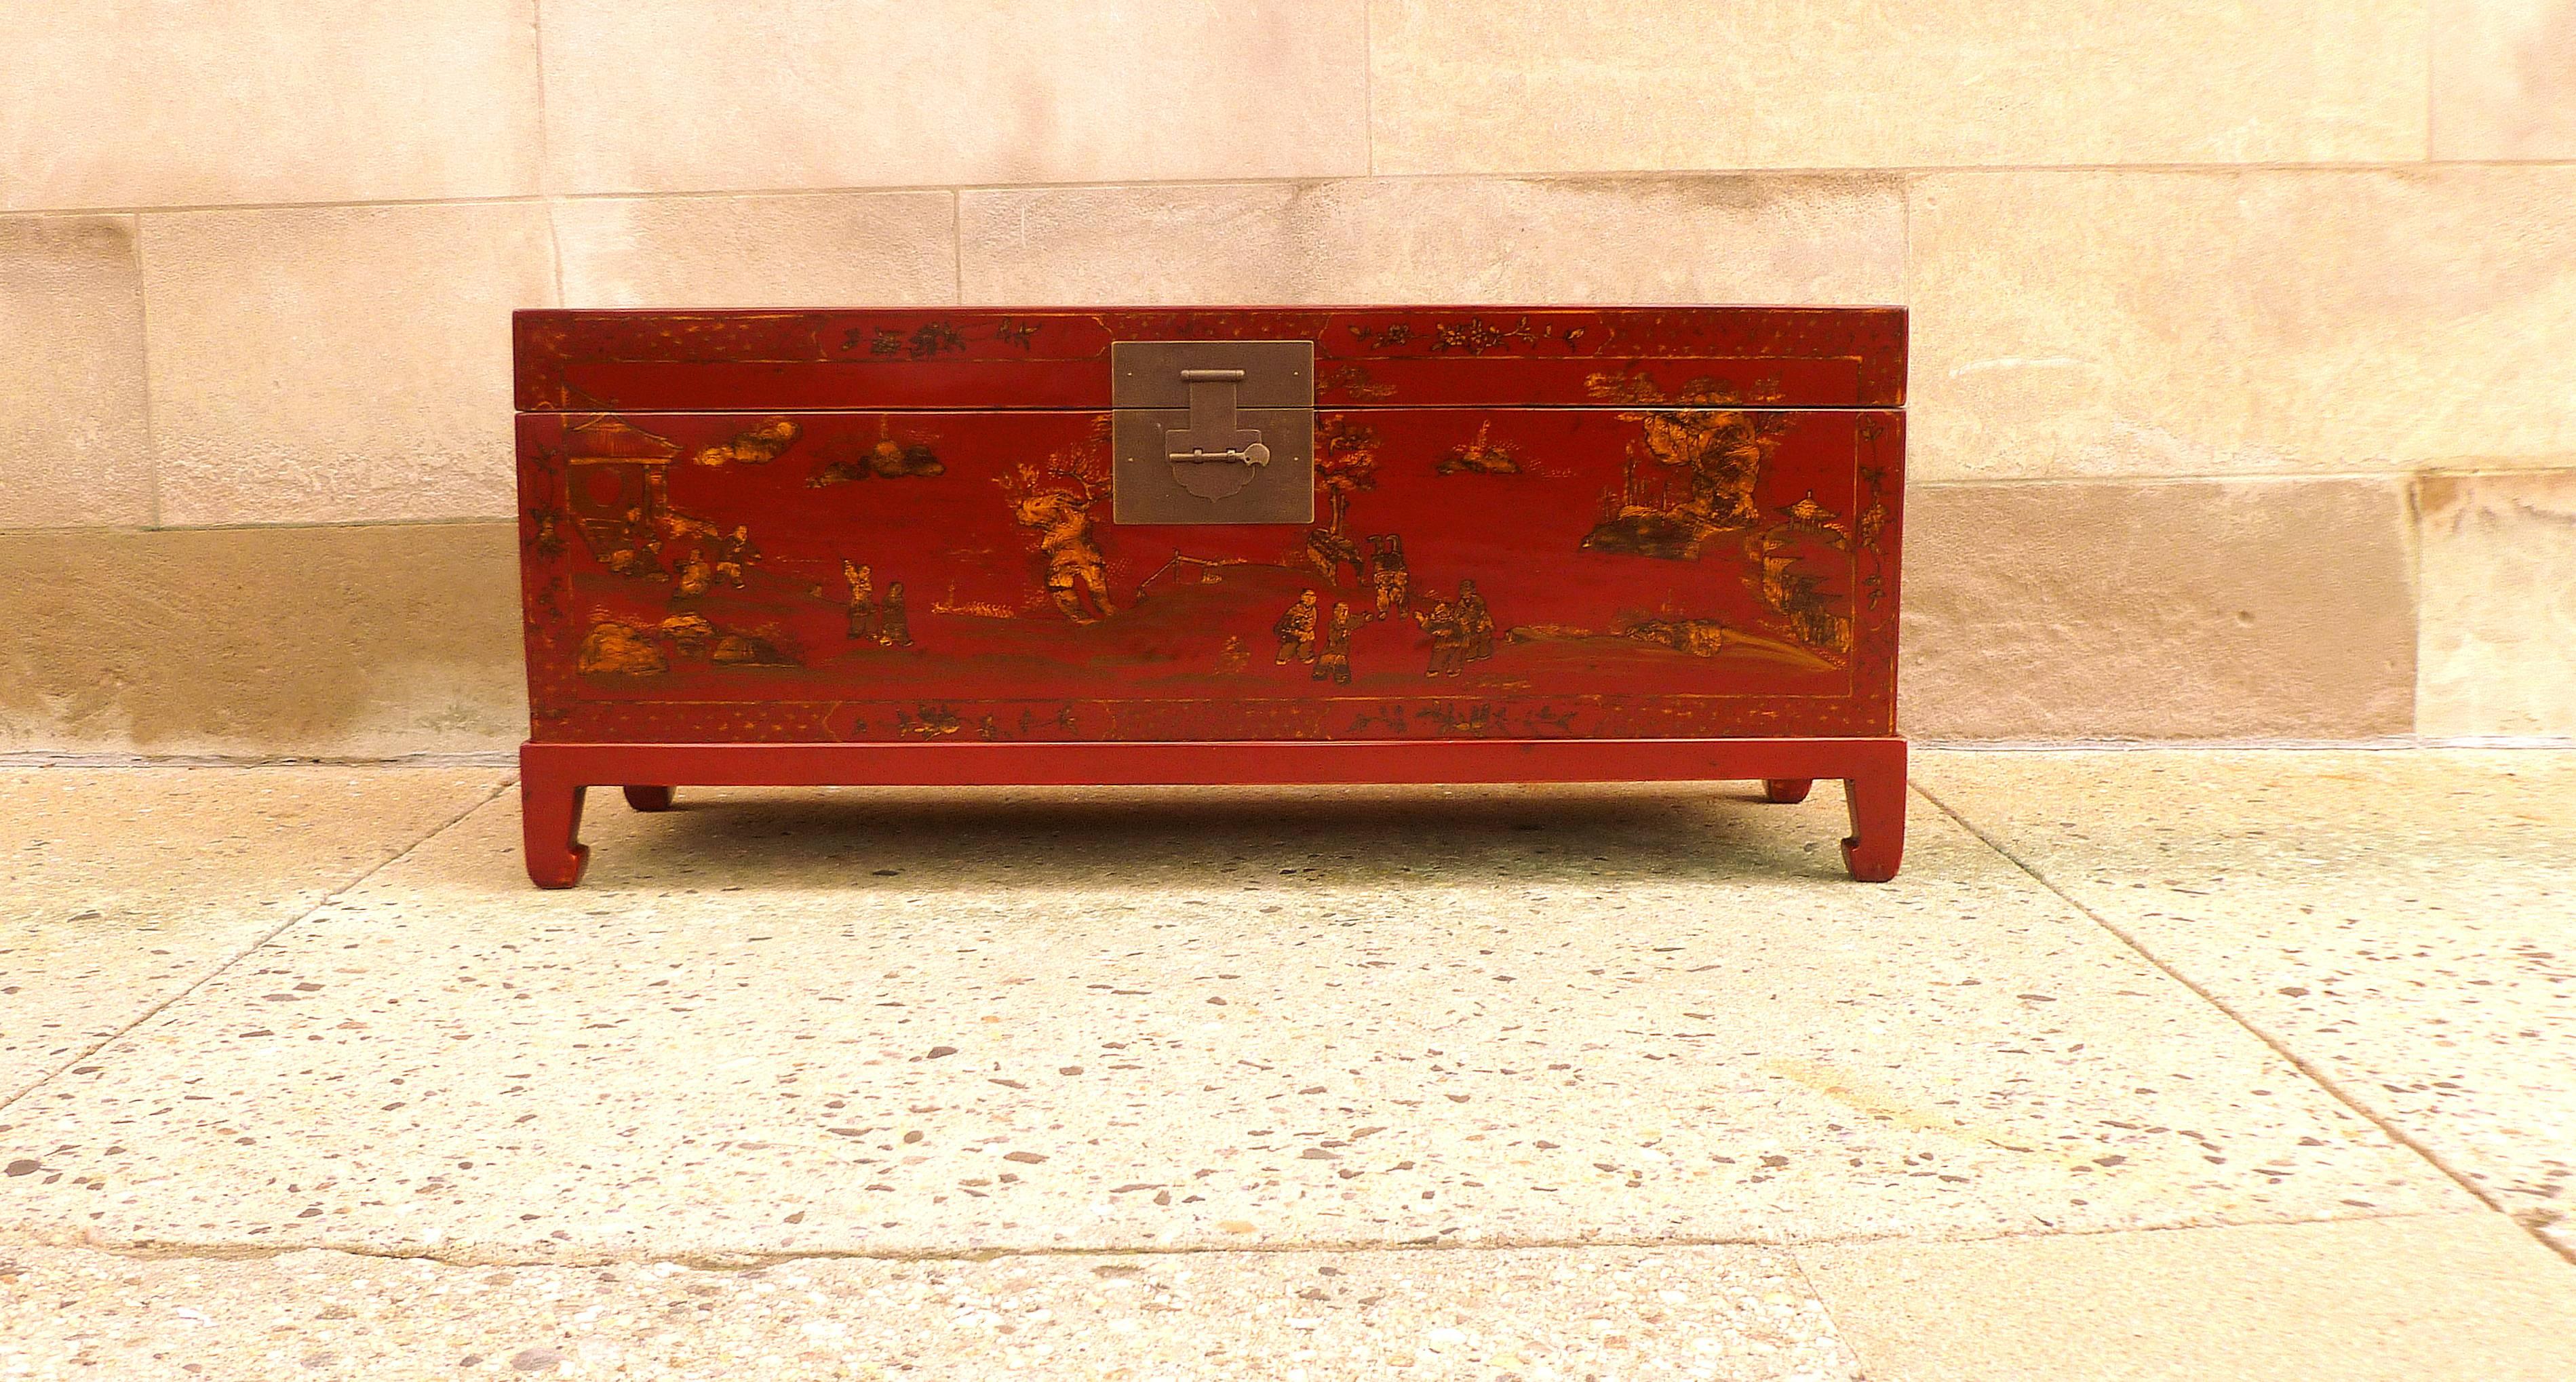 Fine red lacquer trunk with gilt landscape motif, beautiful color finished and form, trunk on stand.  We carry fine quality furniture with elegant finished and has been appeared many times in 